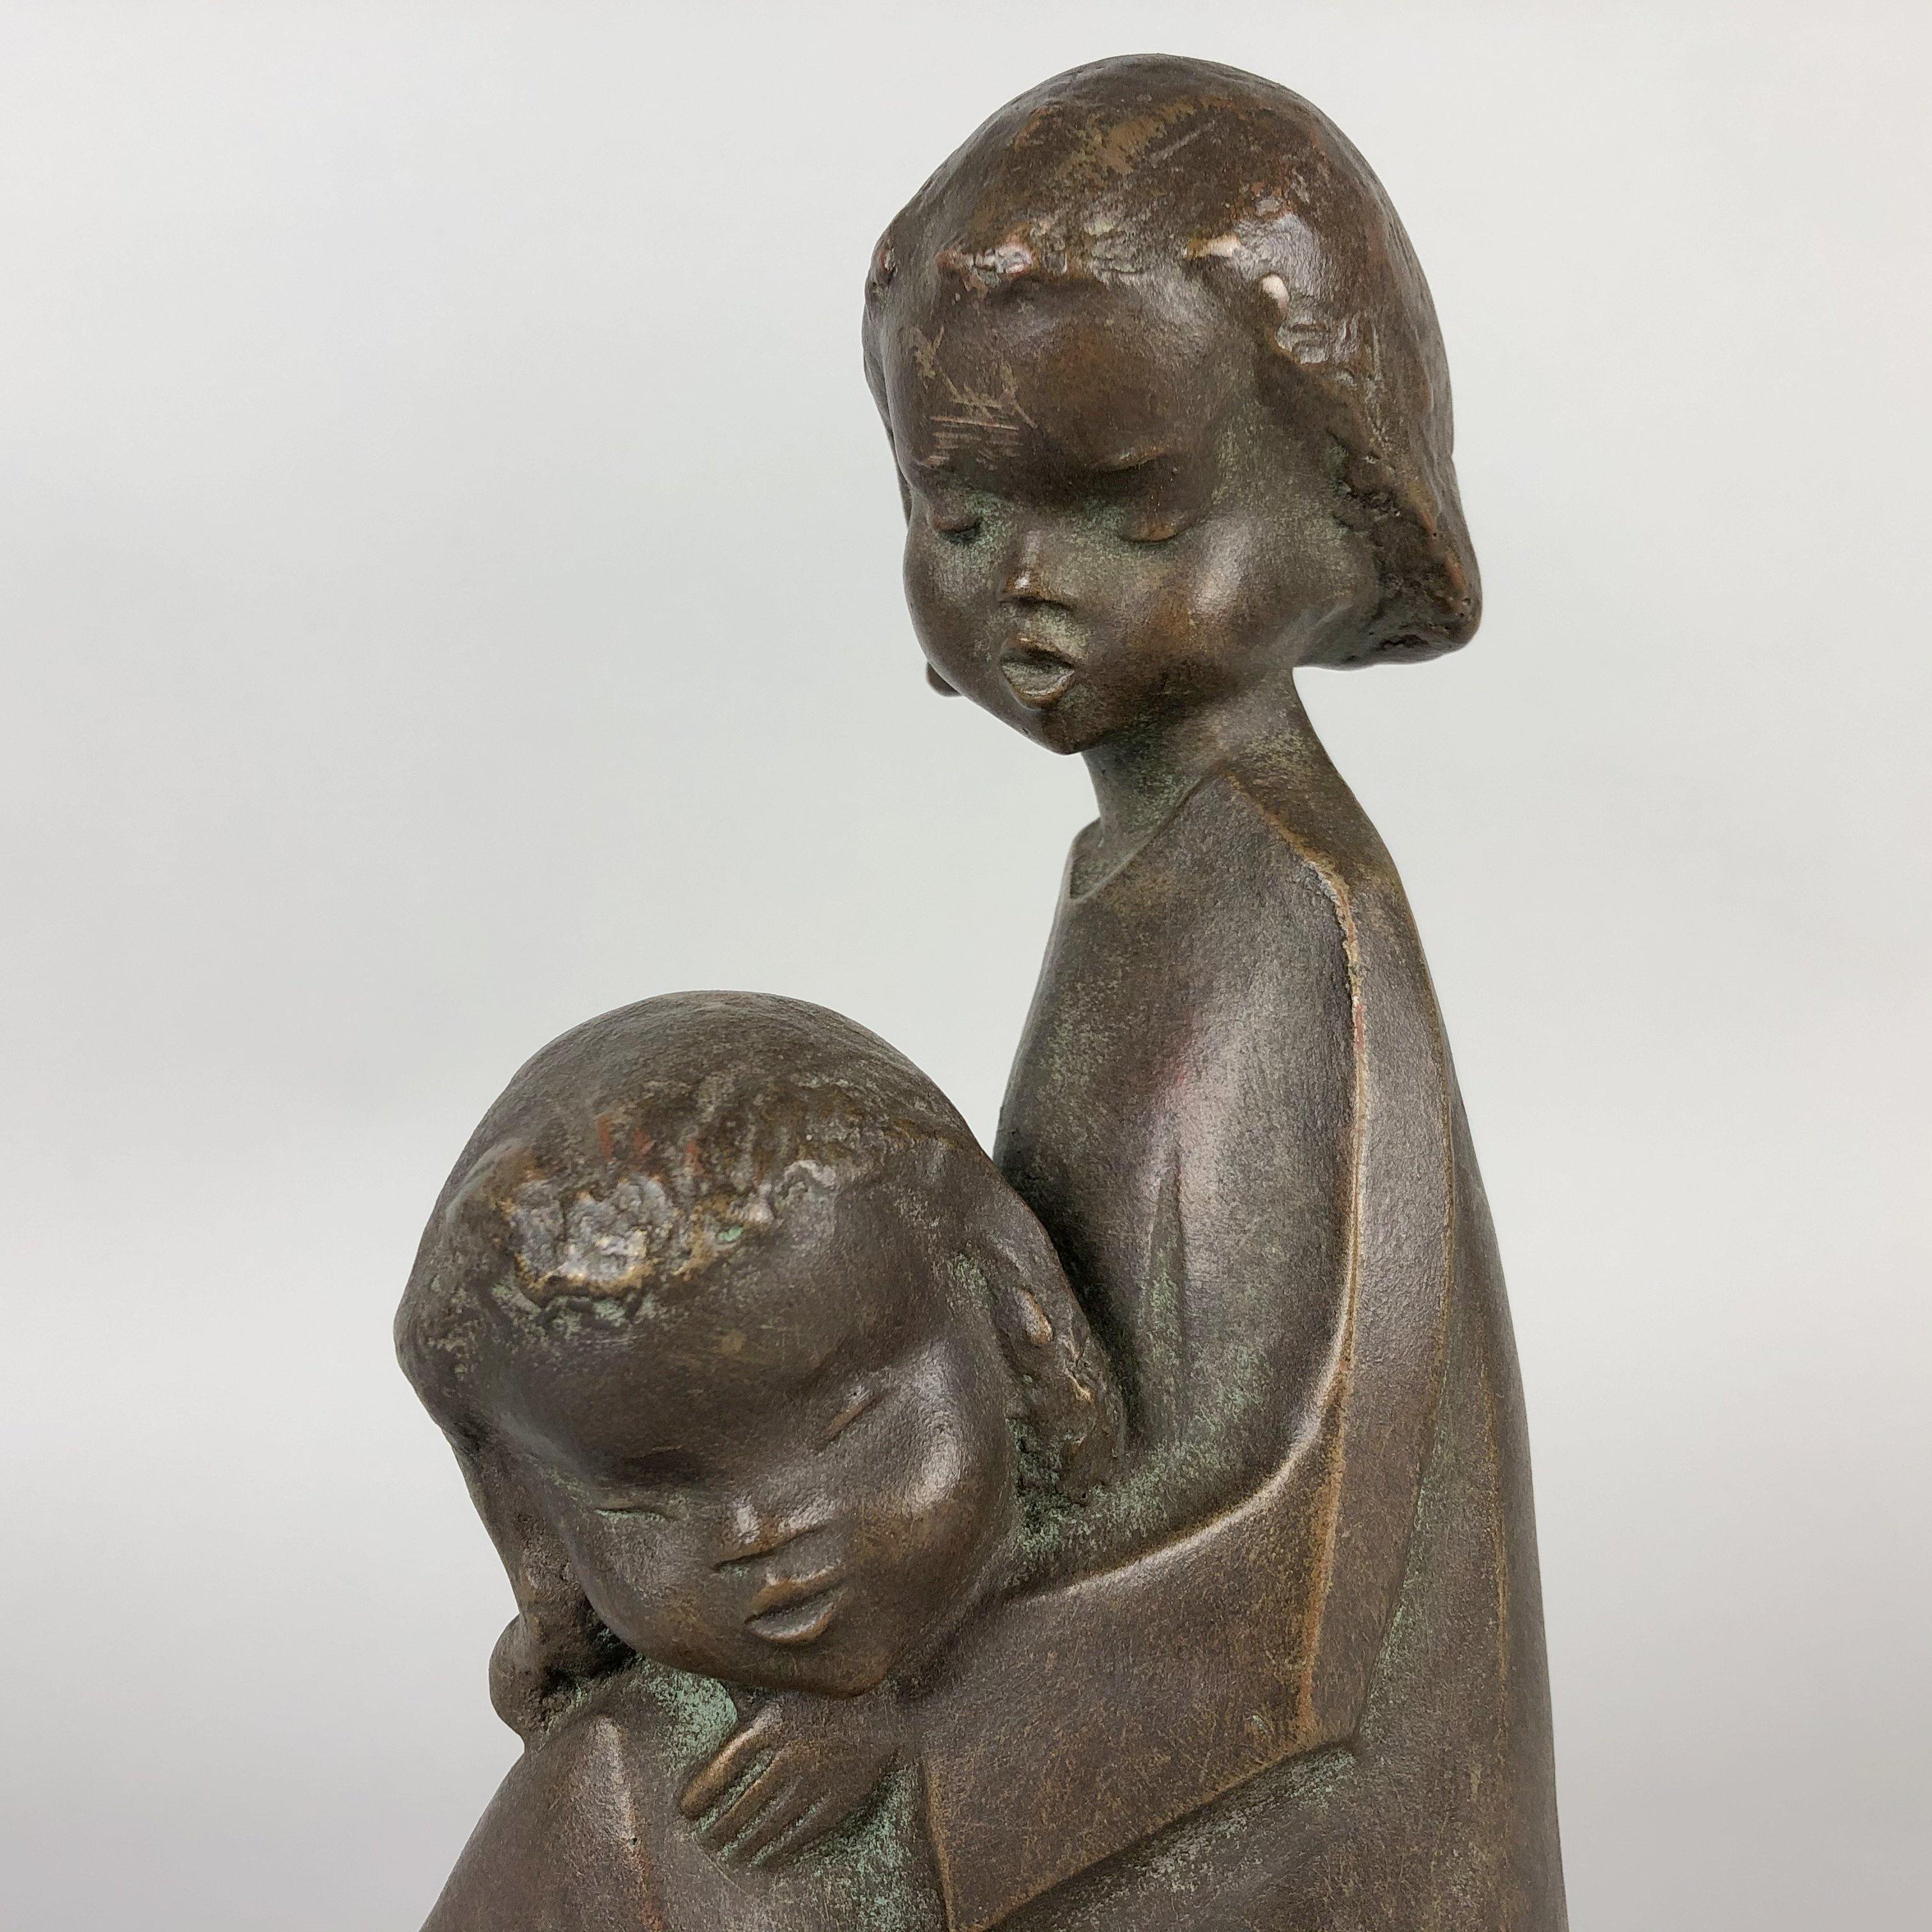 Vintage achatit sculpture depicting two children. Bronze look. It is very light.
Achatit is a non-ceramic material registered trademark of the company, made by boiling fine powdered stone with sawdust and a binding agent which is poured into a